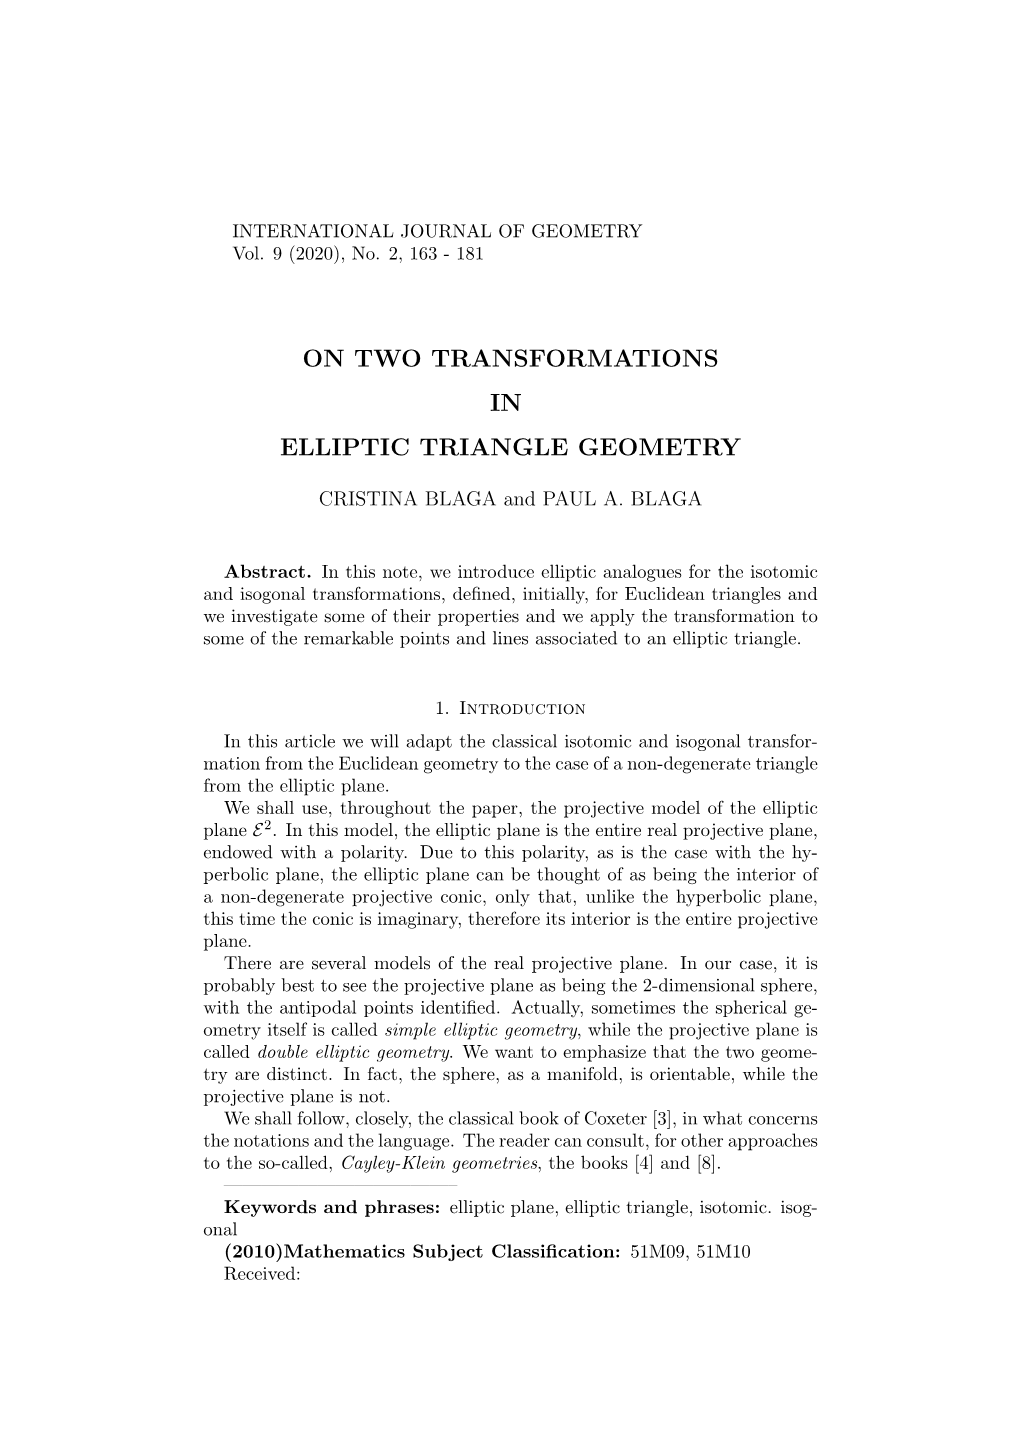 On Two Transformations in Elliptic Triangle Geometry